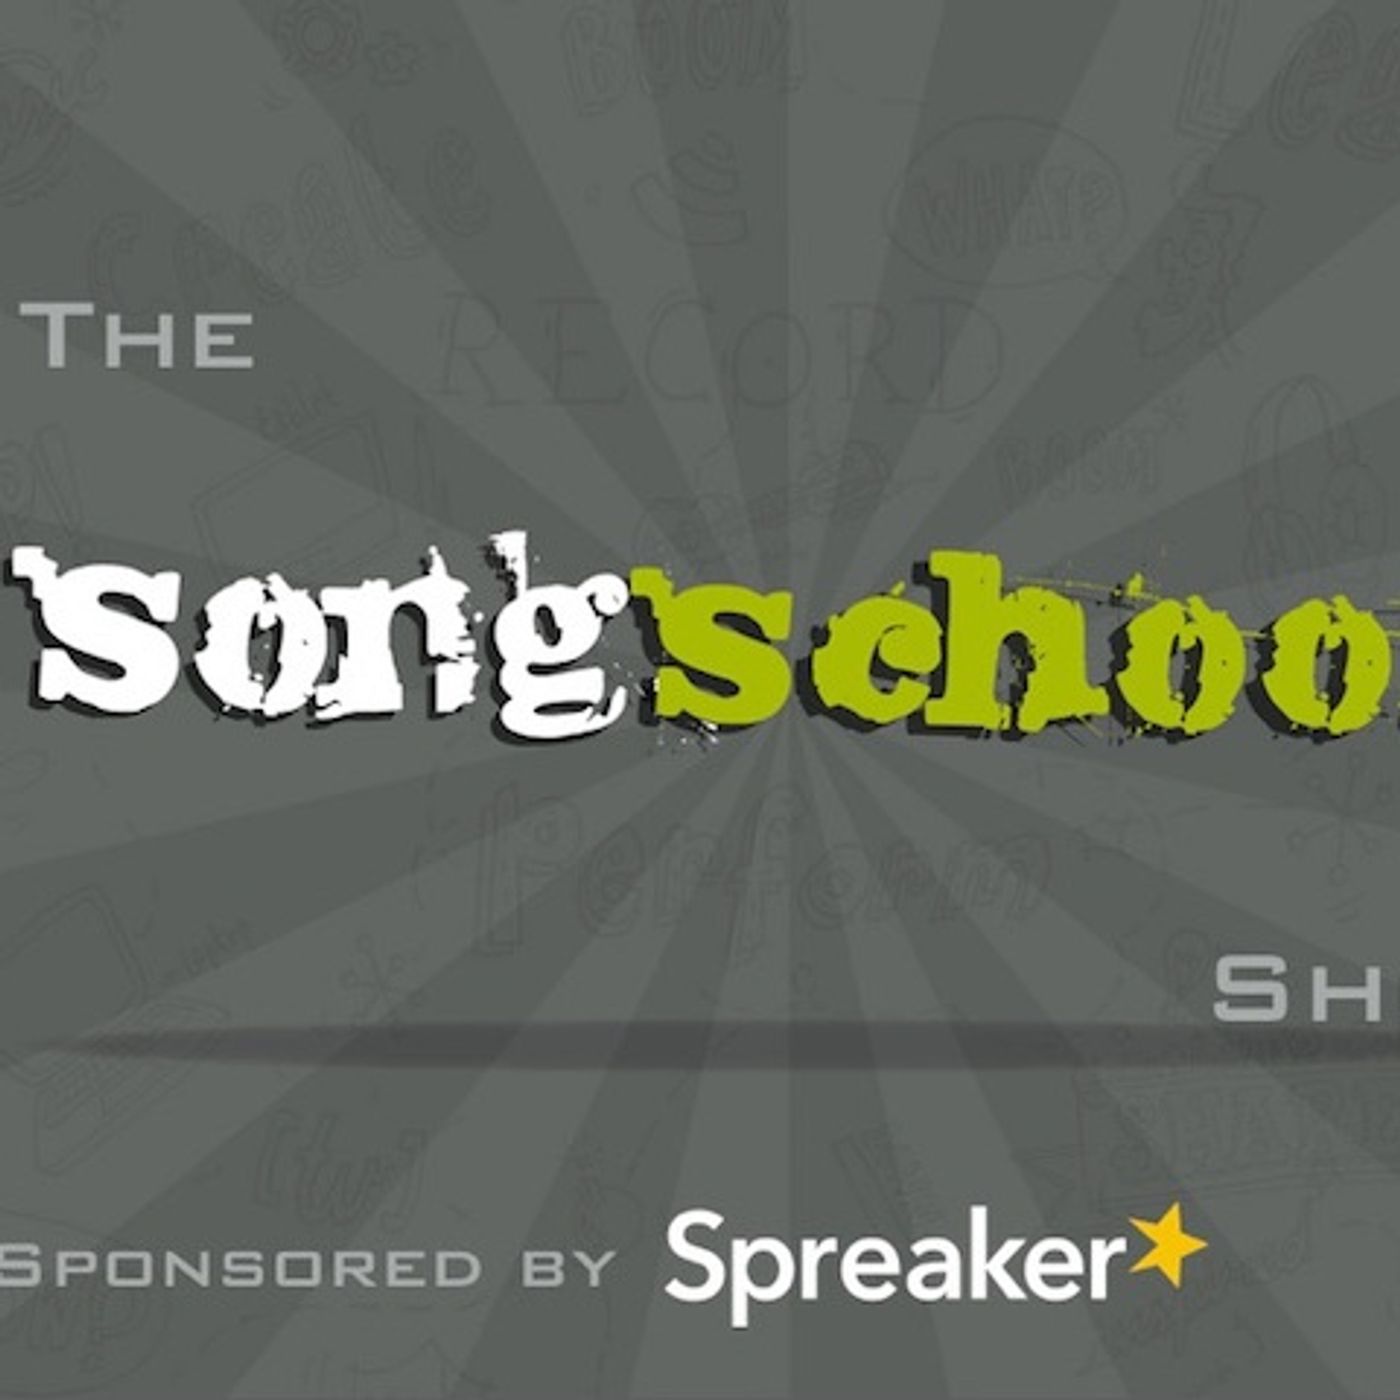 The Songschool Show @ Mercy Secondary School Waterford